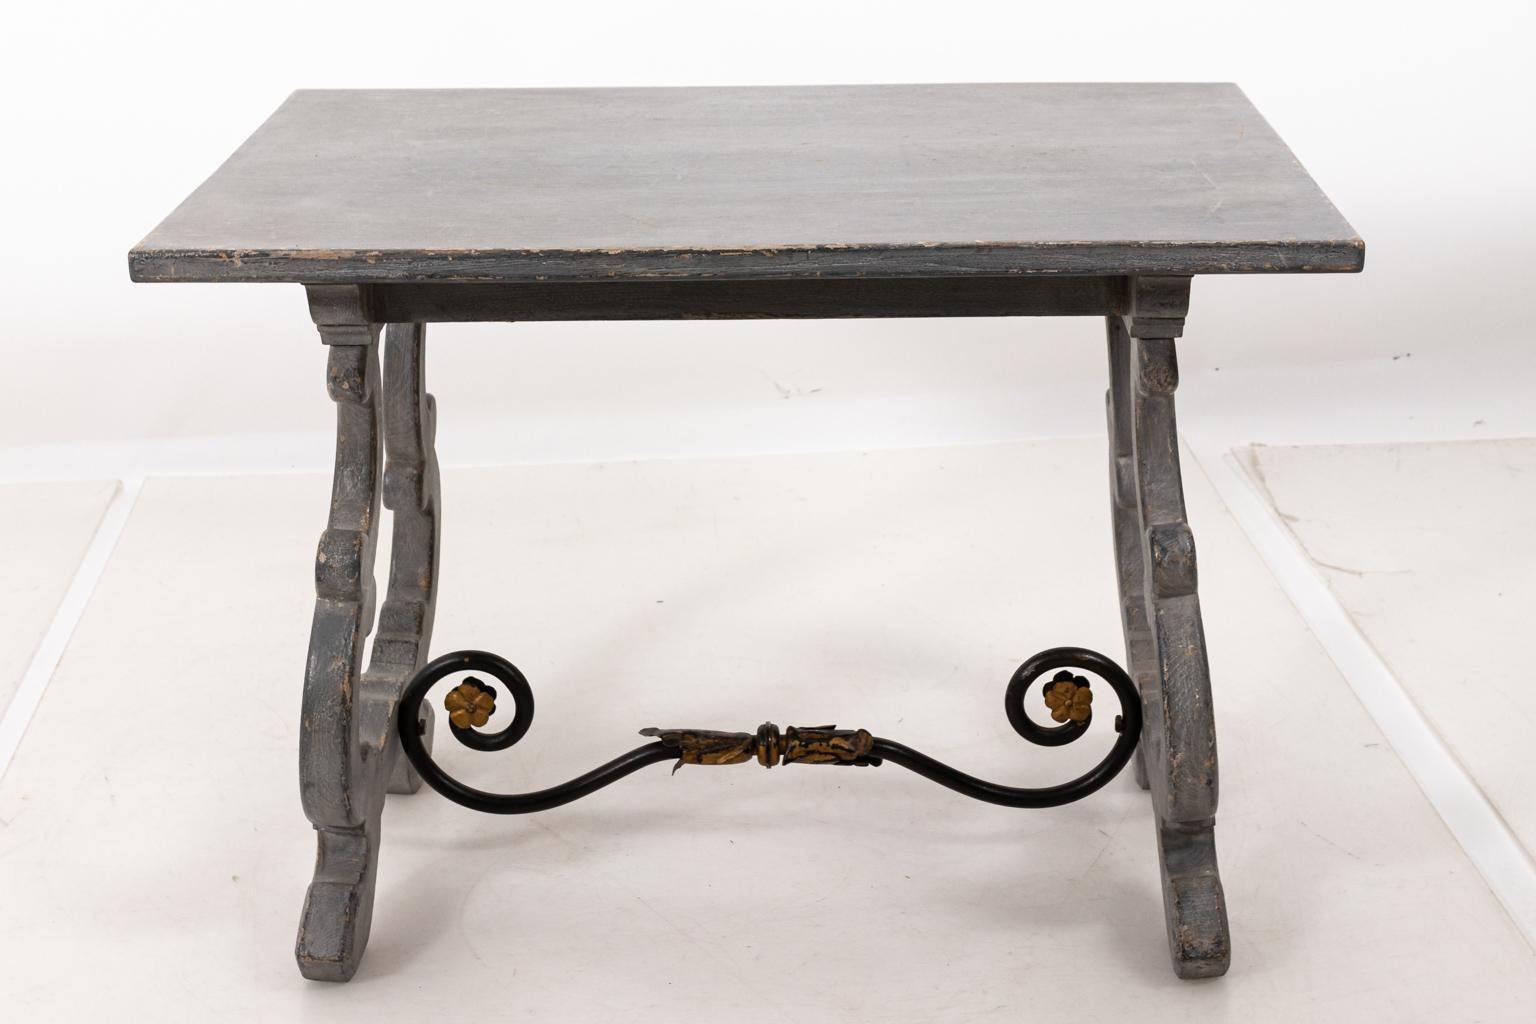 Spanish carved rectangular accent table with scrolled Iron cross stretcher and gilded detail, circa 1960s. The piece also features a trompe l'oeil blue stone painted top with gray/blue finish. Please note of wear consistent with age including